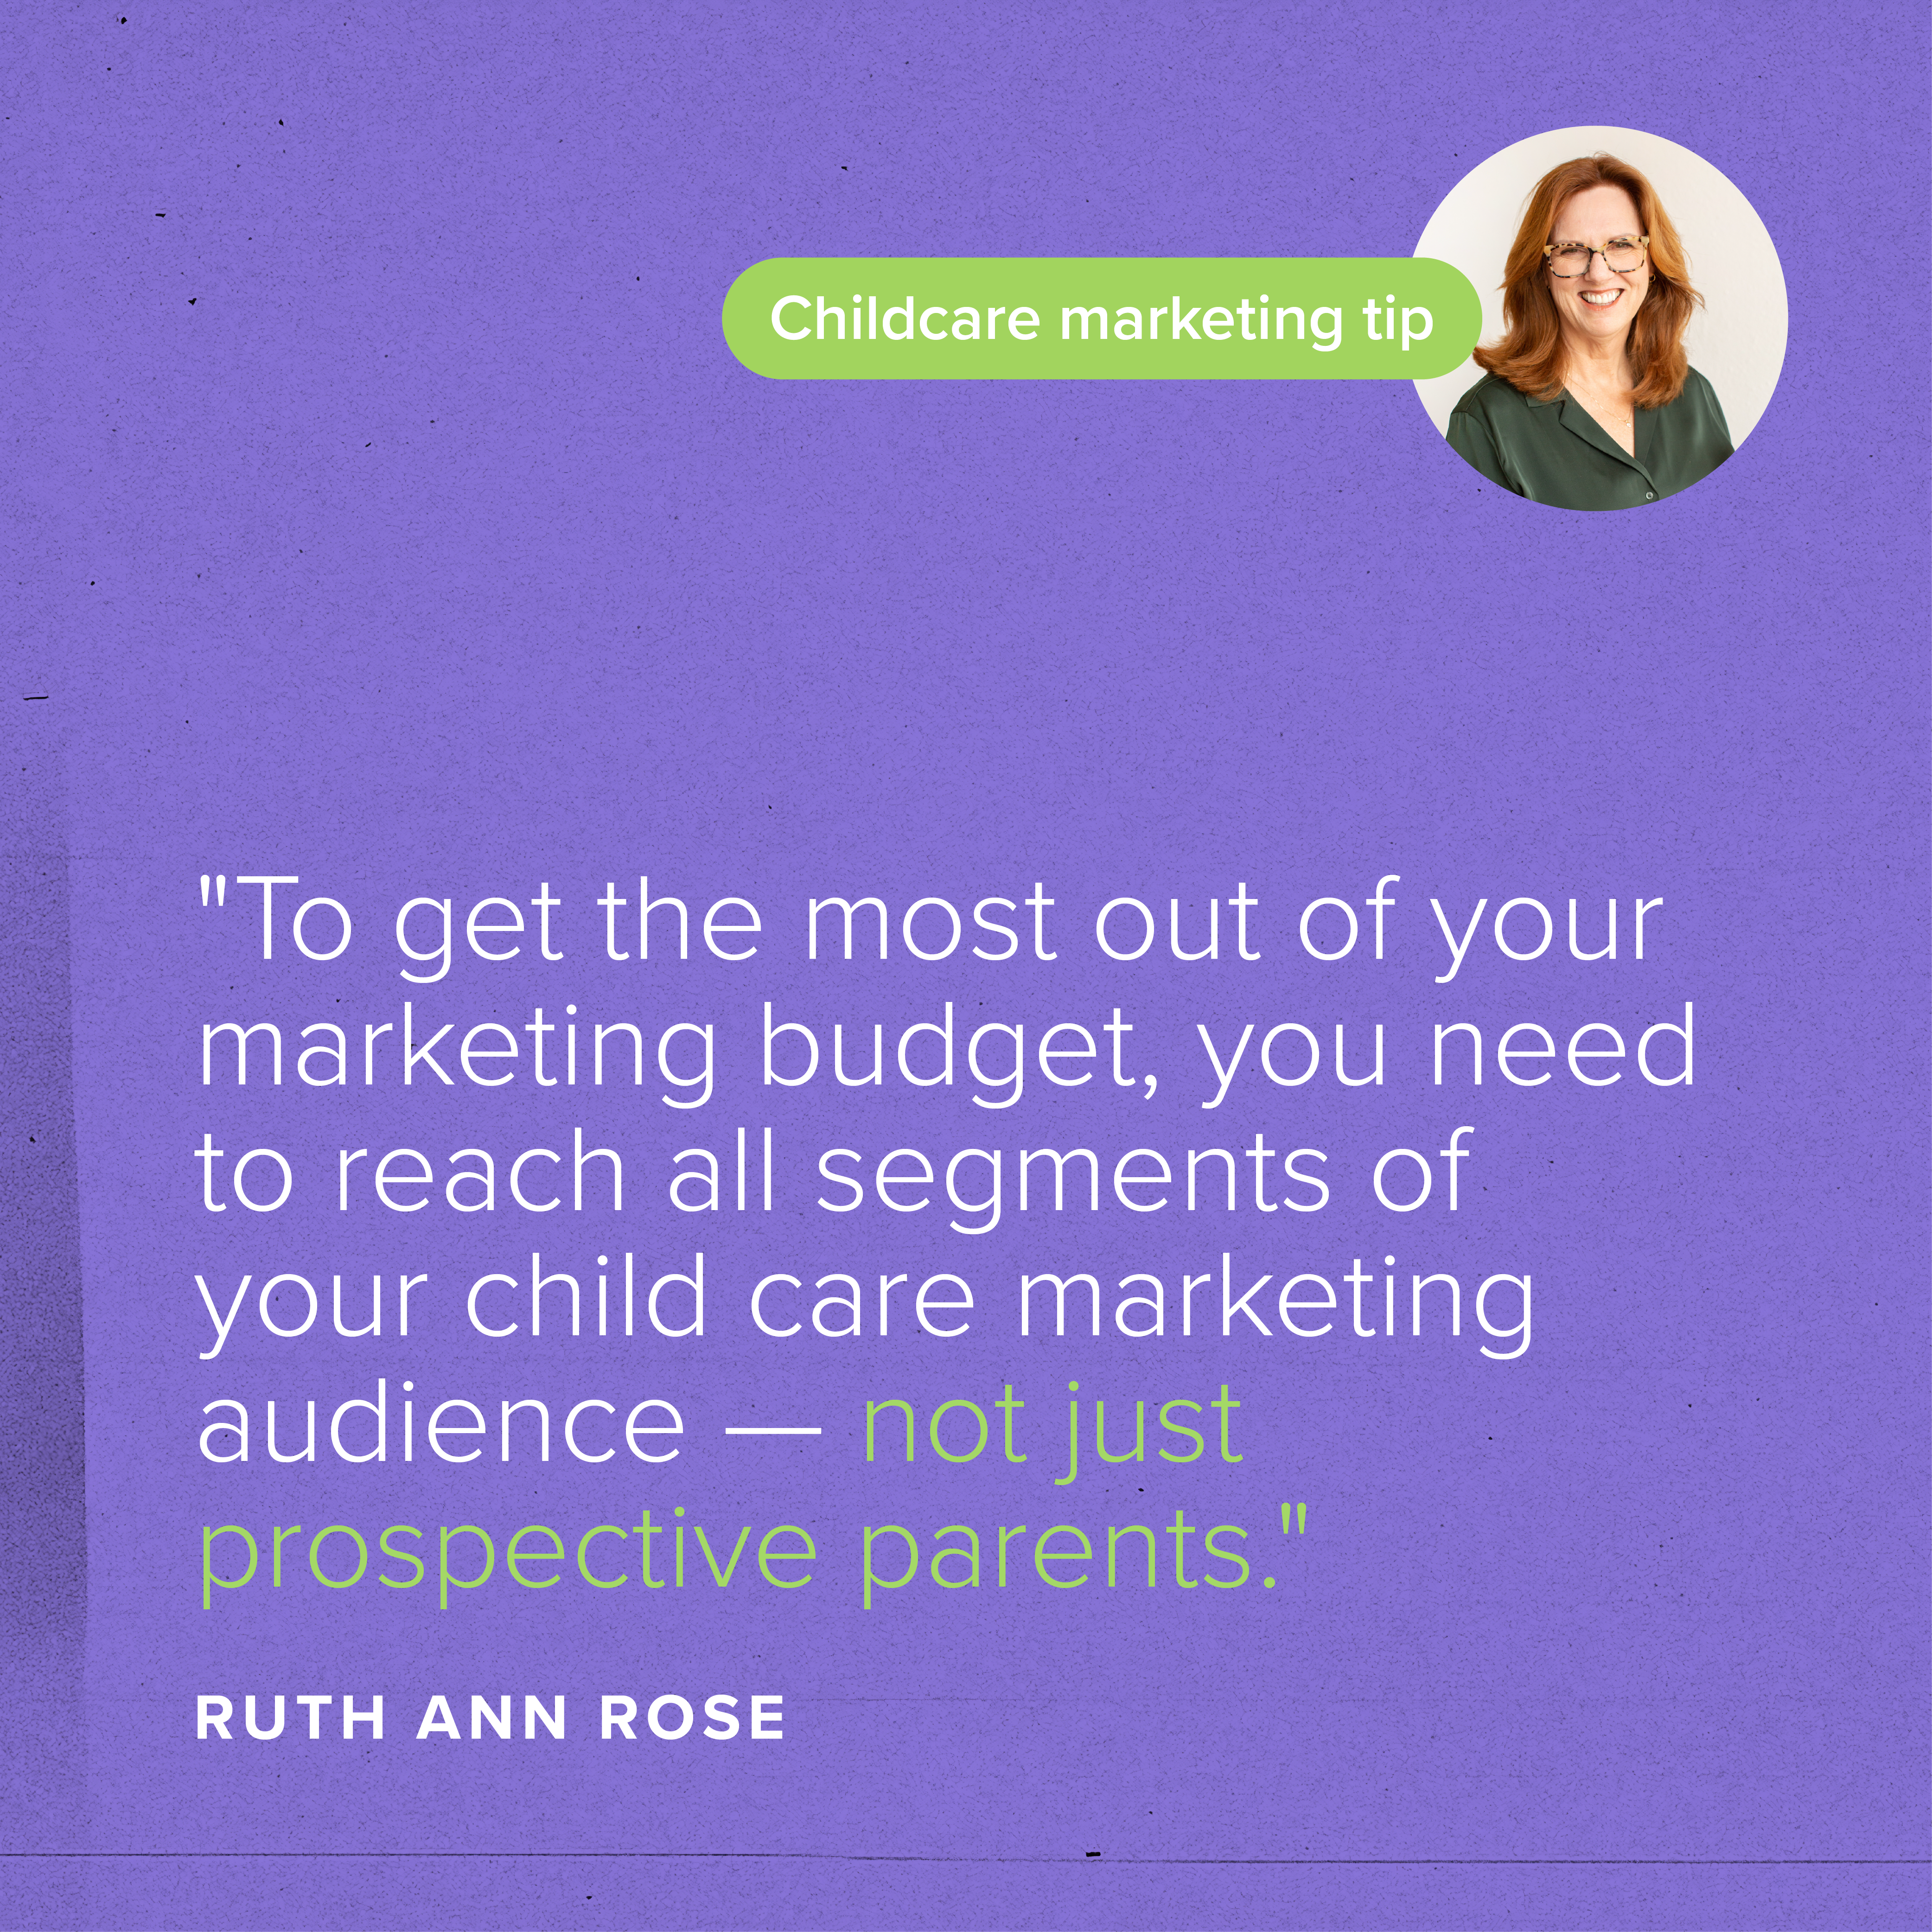 Quote Card: Who Are Your Child Care Marketing Audiences?